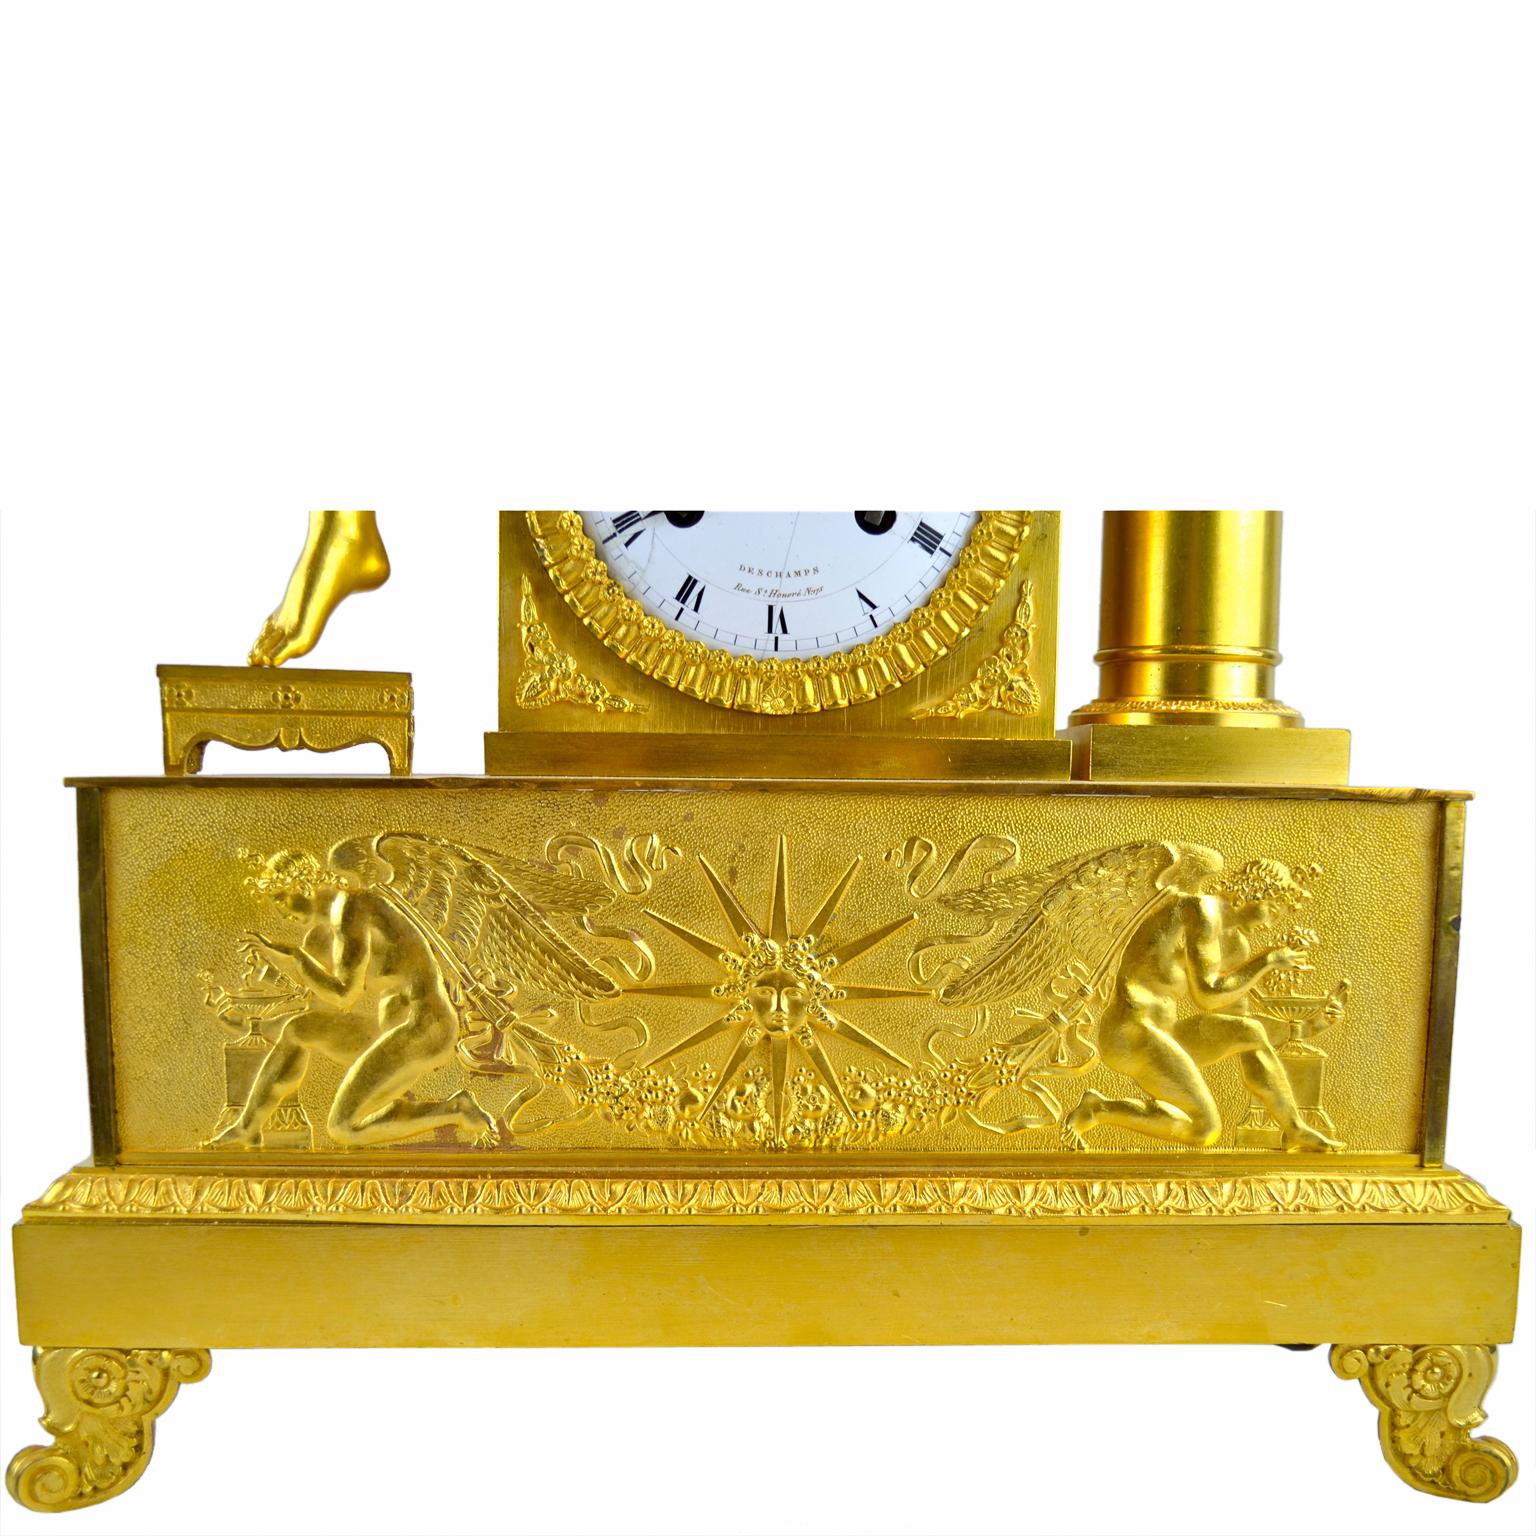 French Empire Allegorical Clock of Love Nourishing Life For Sale 2